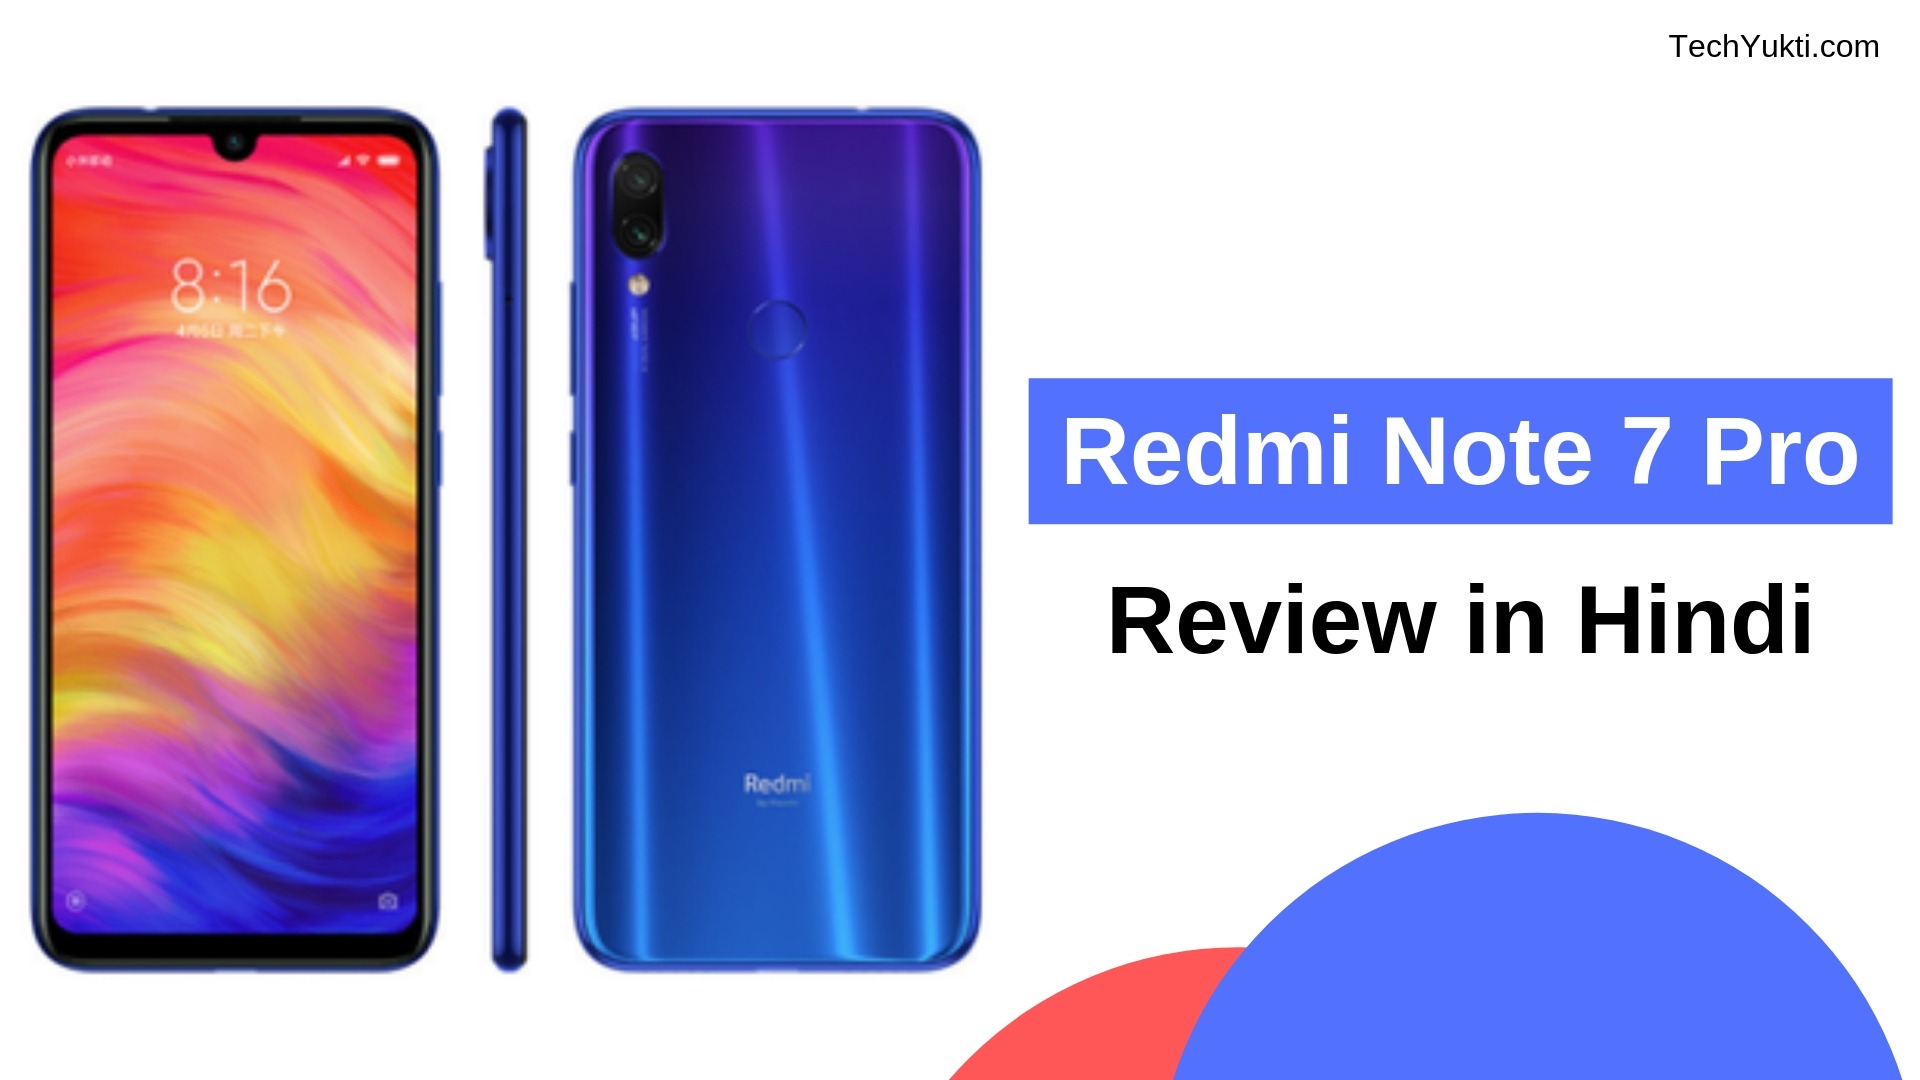 Review of Redmi Note 7 Pro